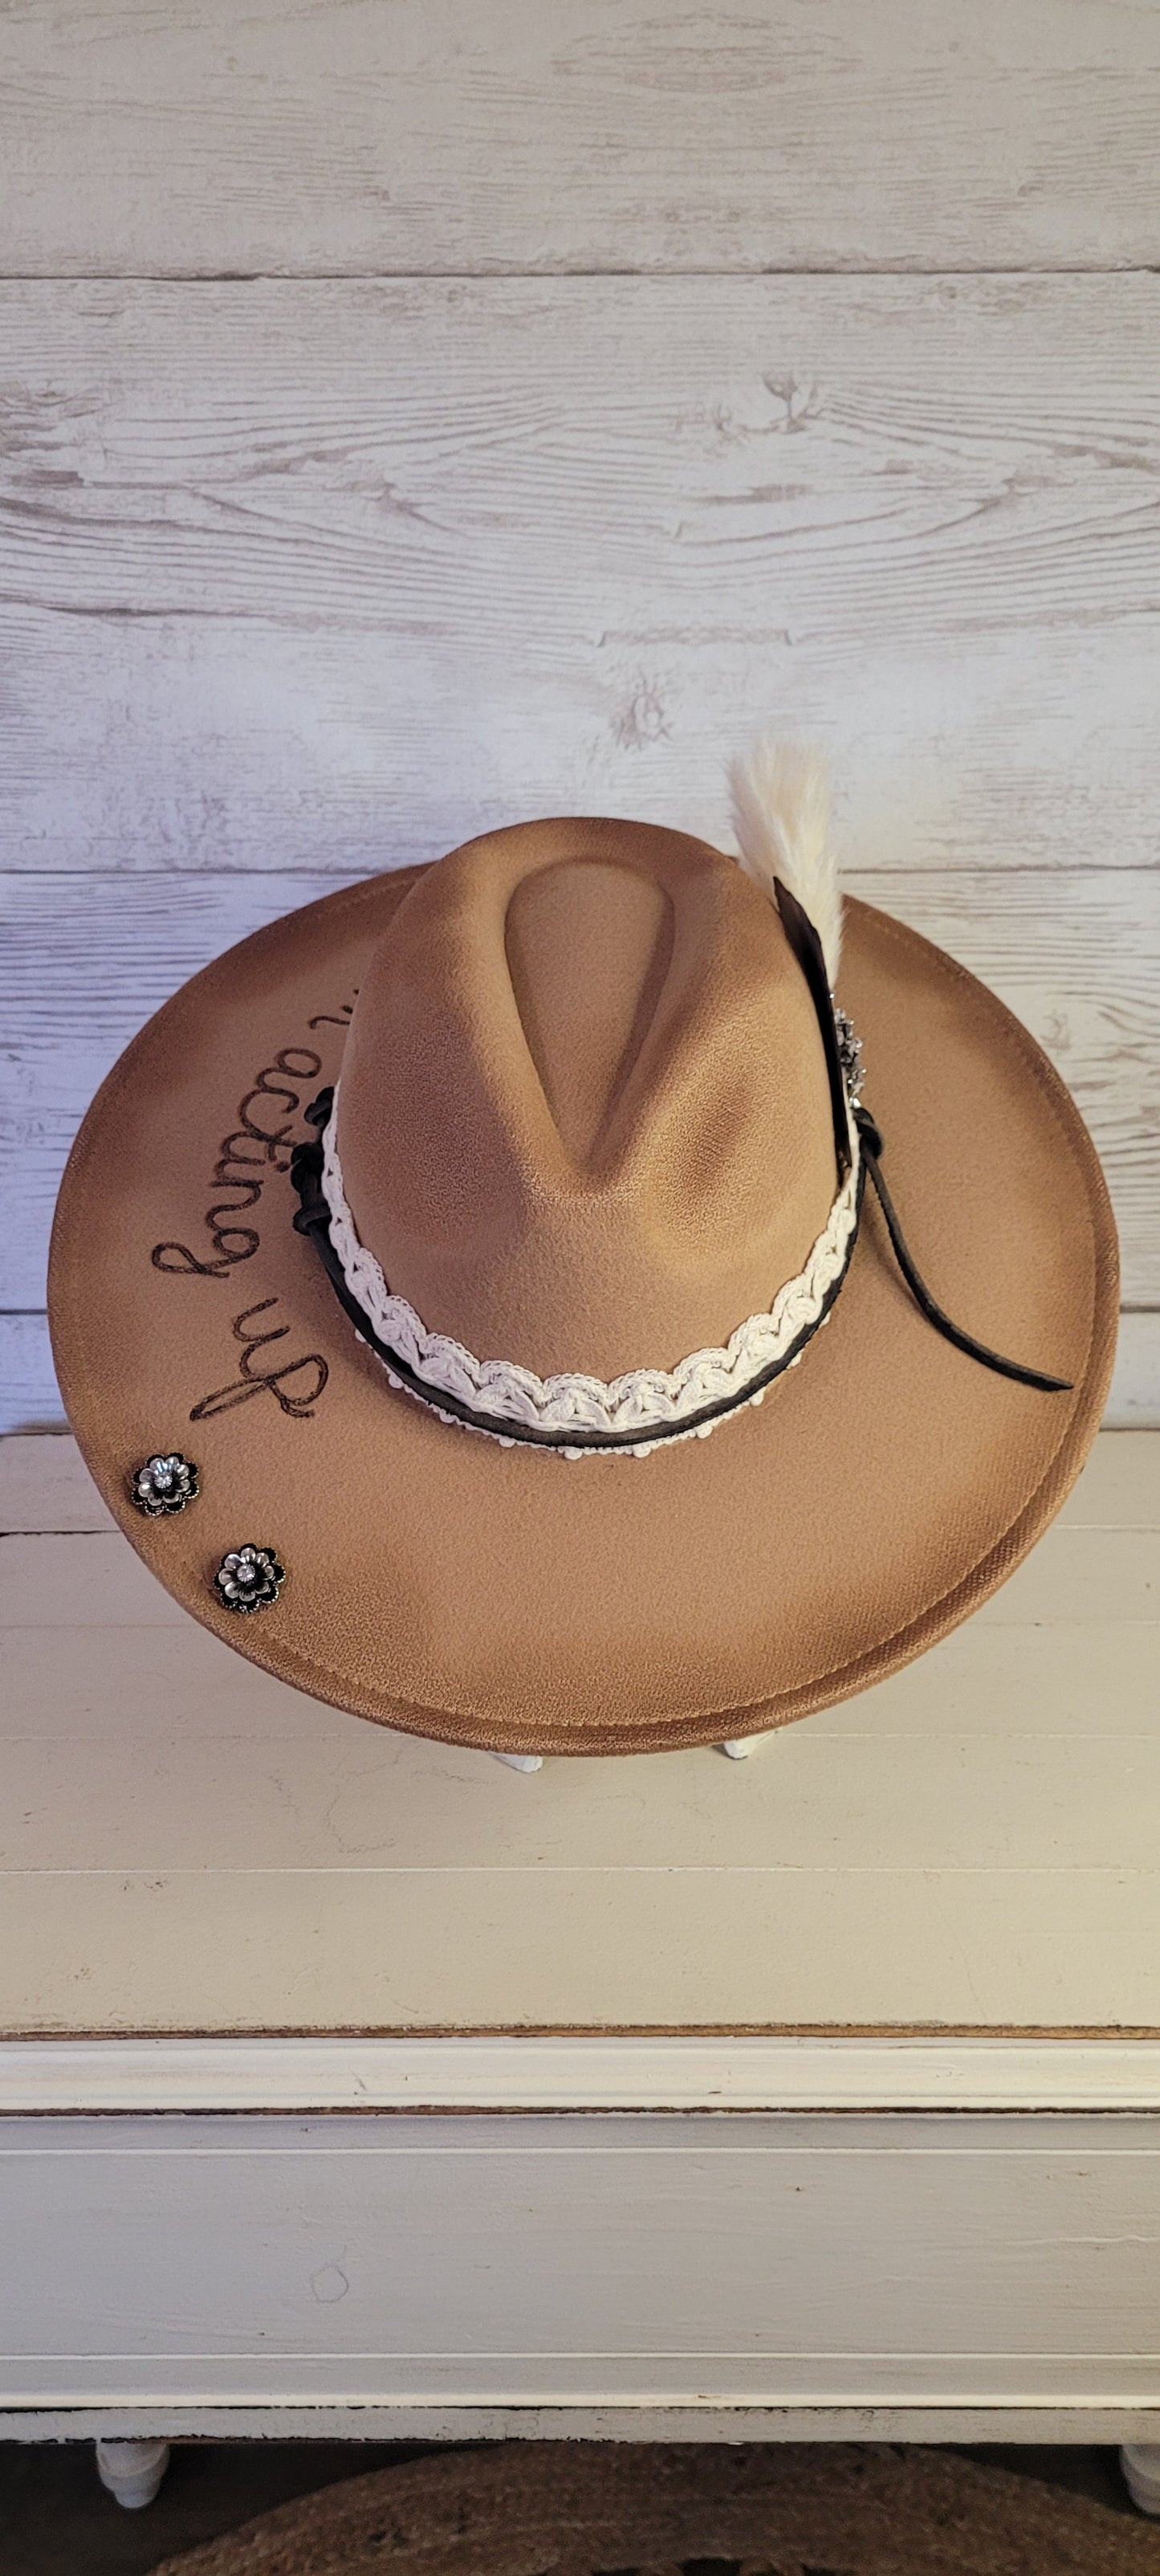 Features "I'm acting up" engraving Lace ribbon, leather band, pampas, rhinestone brooches, playing card Felt hat Flat brim 100% polyester Ribbon drawstring for hat size adjustment Head Circumference: 24" Crown Height: 5" Brim Length: 15.75" Brim Width: 14.5" Branded & numbered inside crown Custom burned & engraved by Kayla